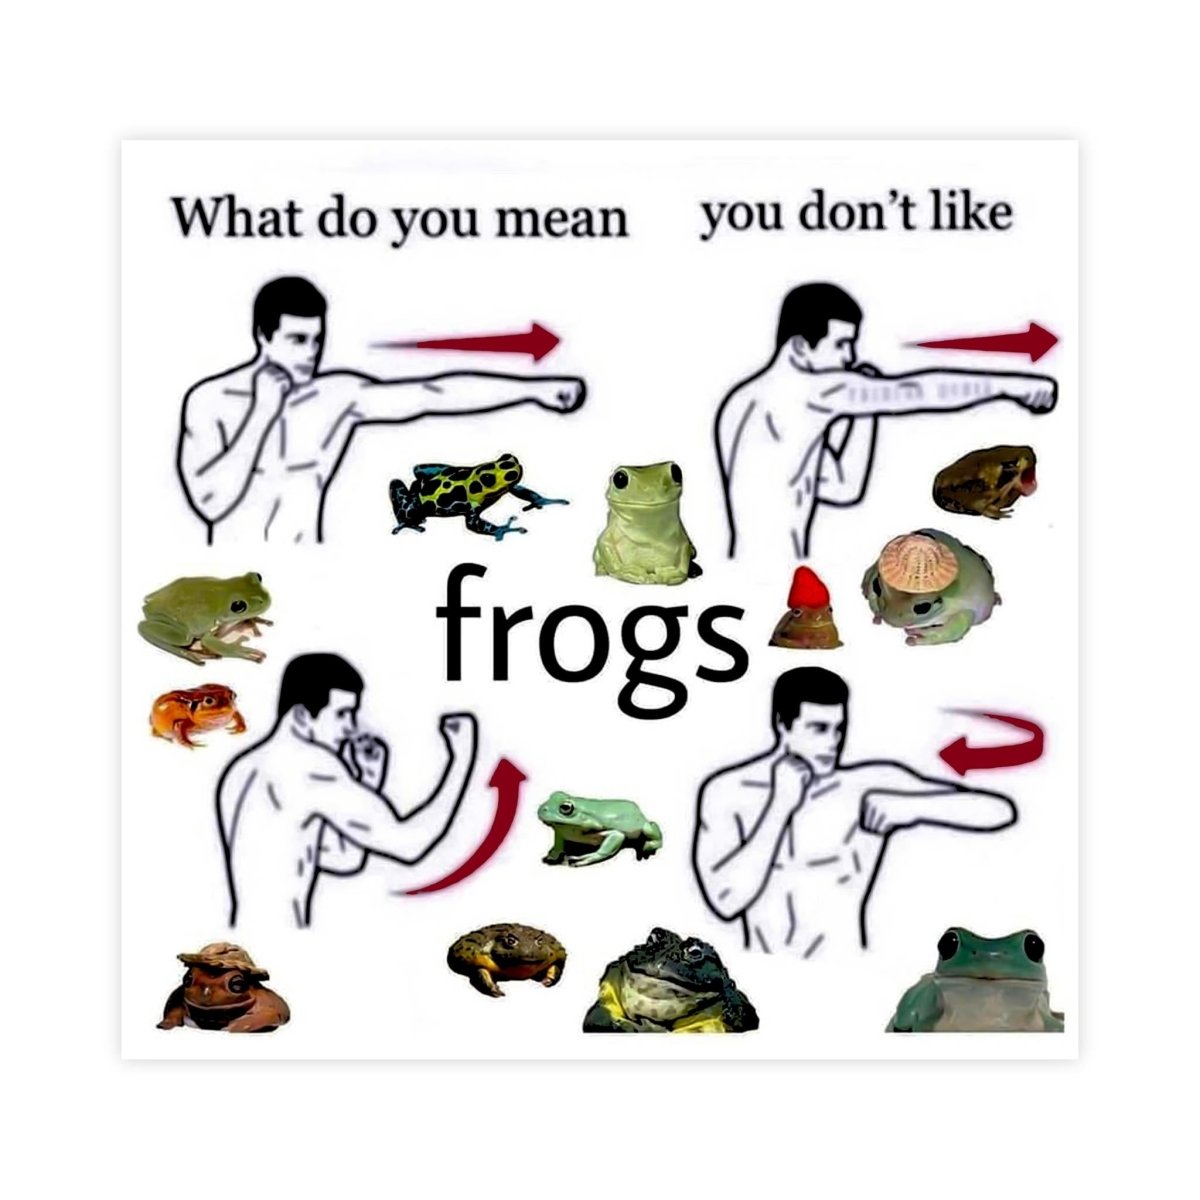 What Do You Mean You Don't Like Frogs Meme Sticker - stickerbullWhat Do You Mean You Don't Like Frogs Meme StickerRetail StickerstickerbullstickerbullTaylor_DontLikeFrogsWhat Do You Mean You Don't Like Frogs Meme Sticker